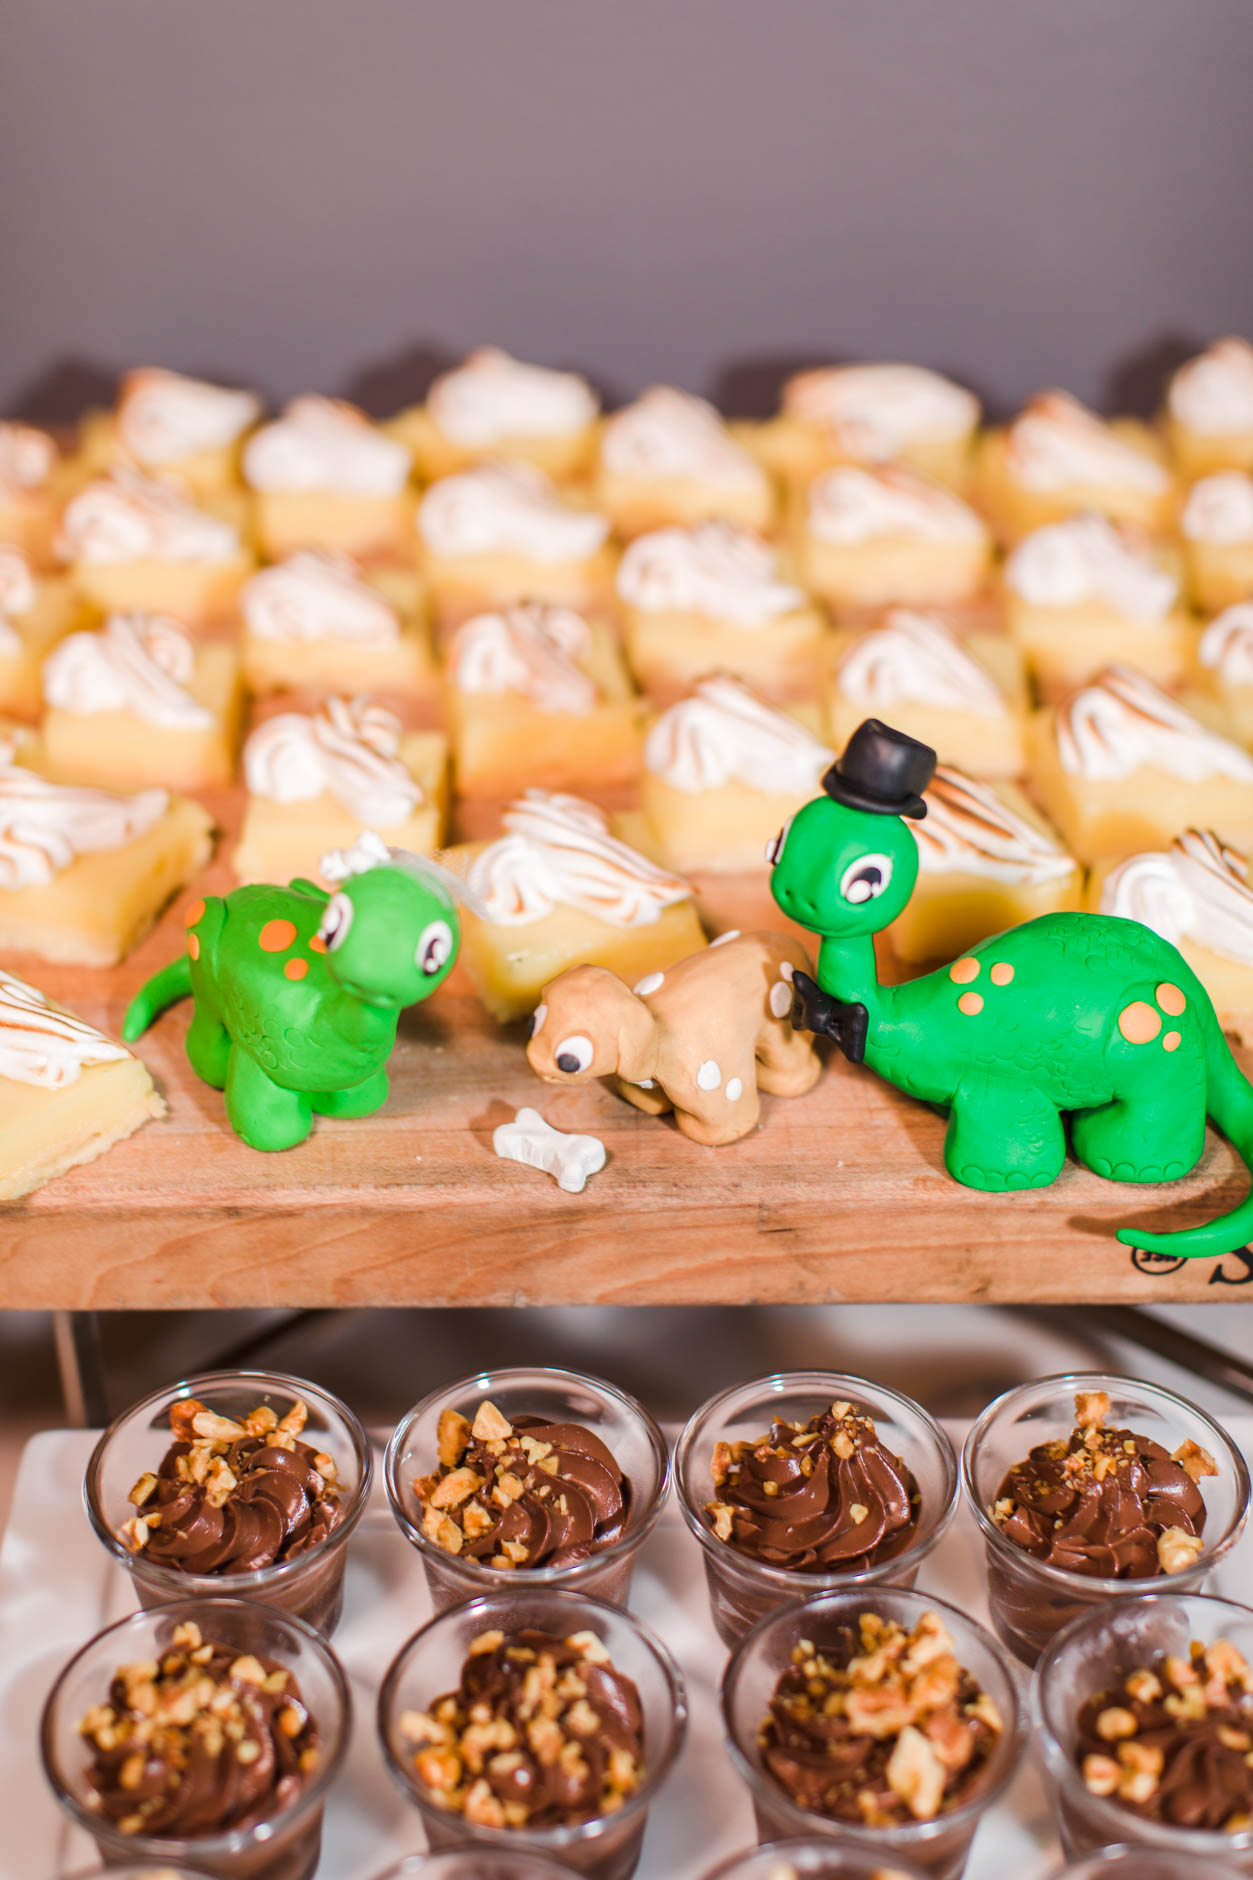 DIY dinosaur bride and groom and pup dessert toppers made of polymer clay